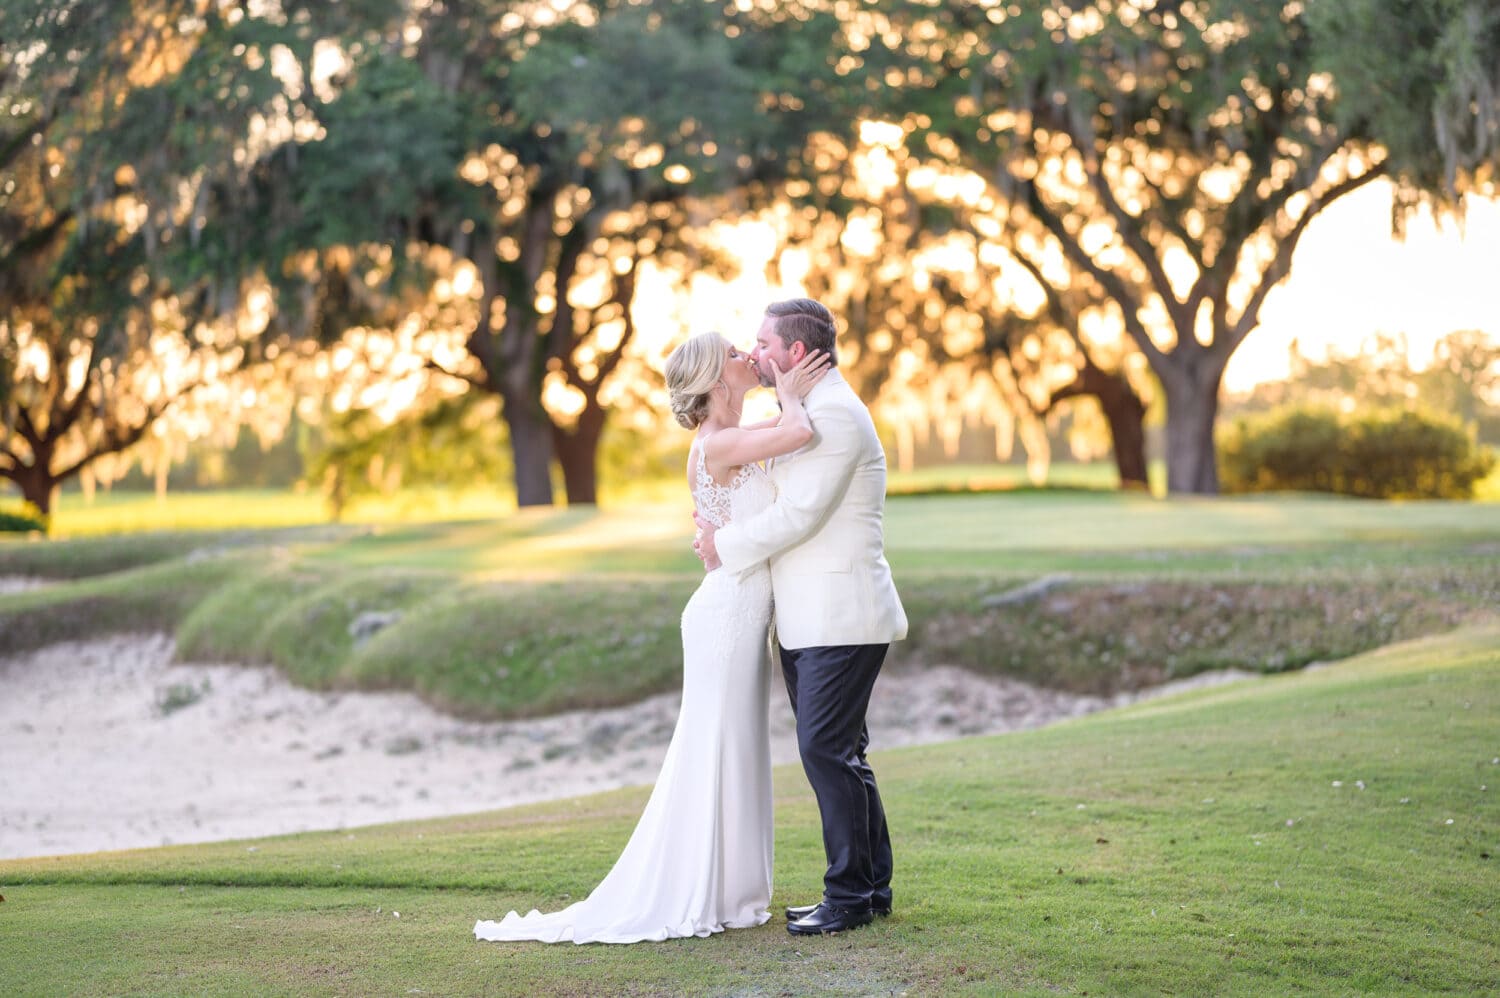 Kiss in the sunset on the golf course - Caledonia Golf & Fish Club